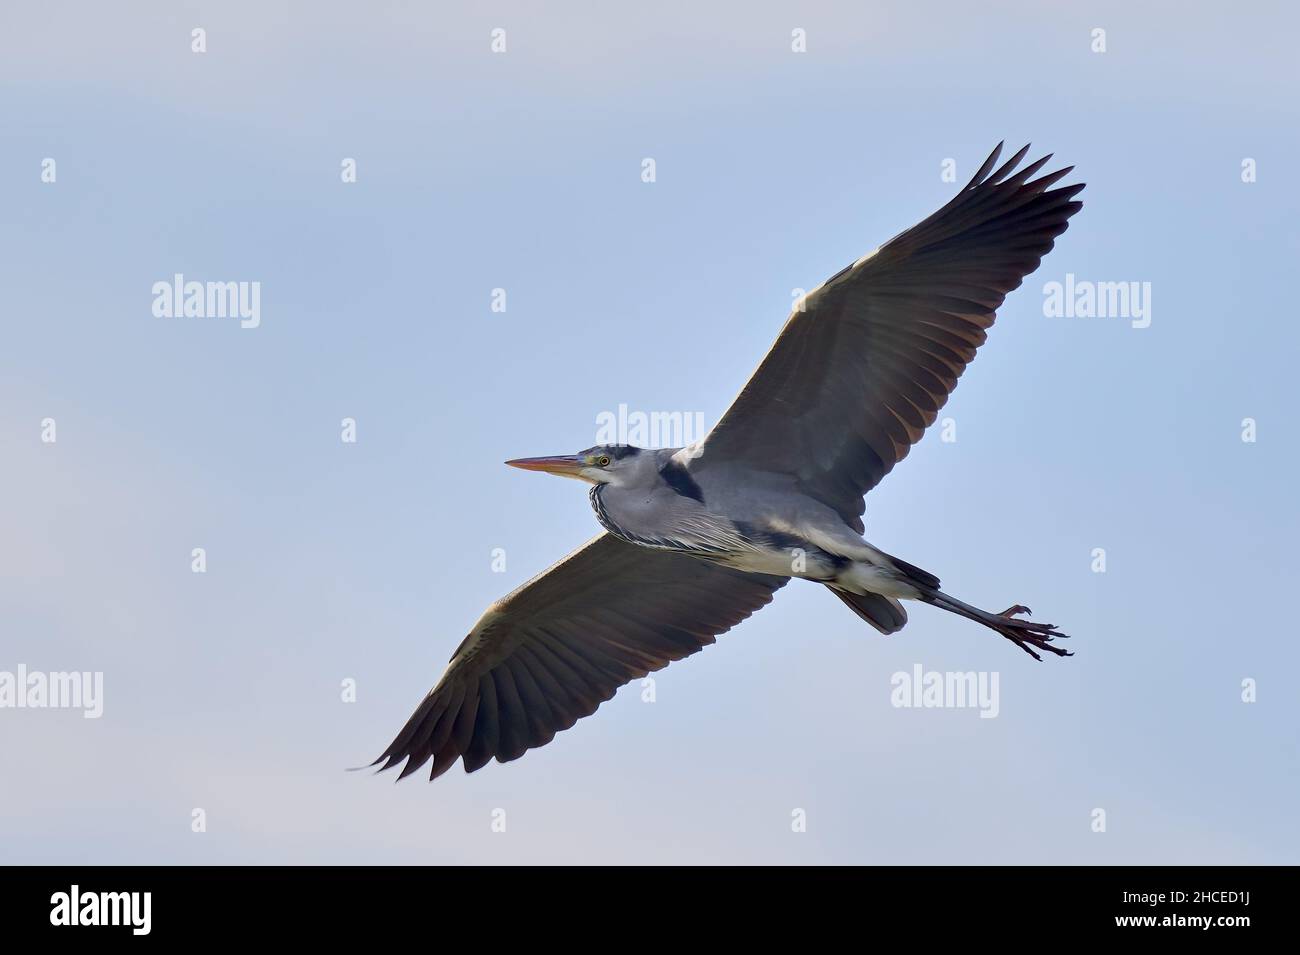 Grey heron bird in flight. Flying in the blue sky. With its slow flapping wings and its long legs held out behind it. Genus Ardea cinerea. Stock Photo